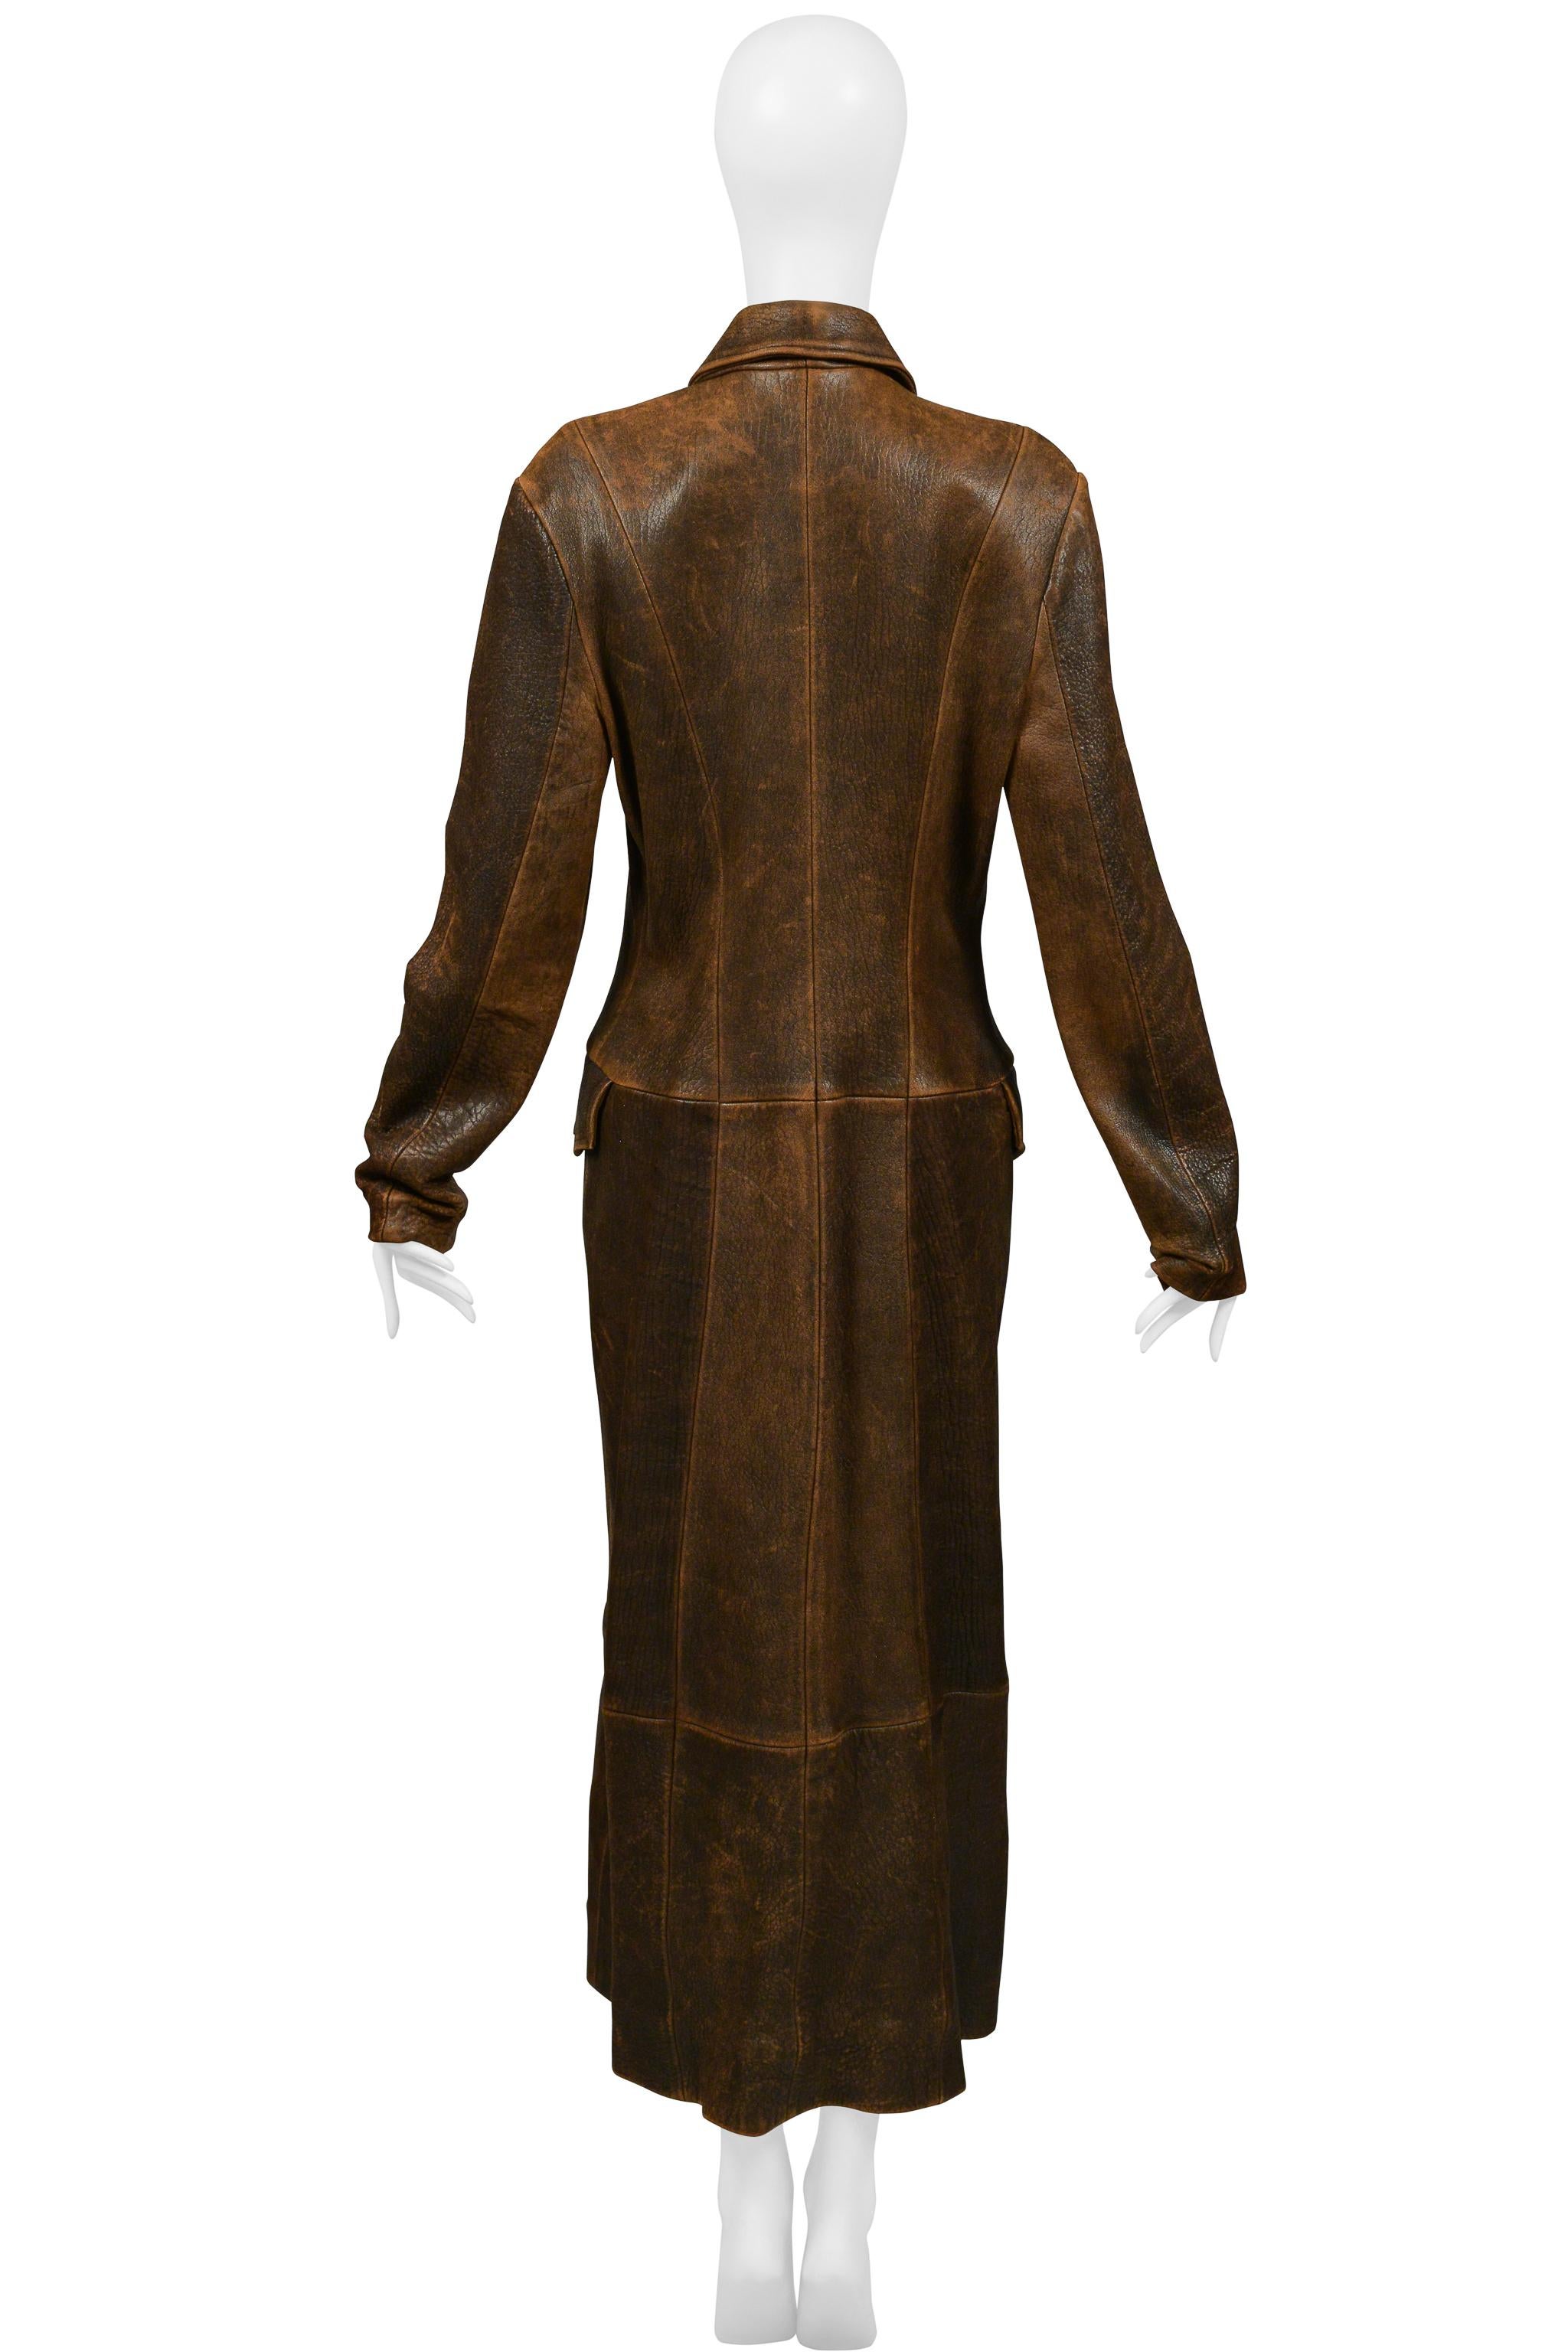 North Beach Leather Brown Distressed Duster For Sale 5